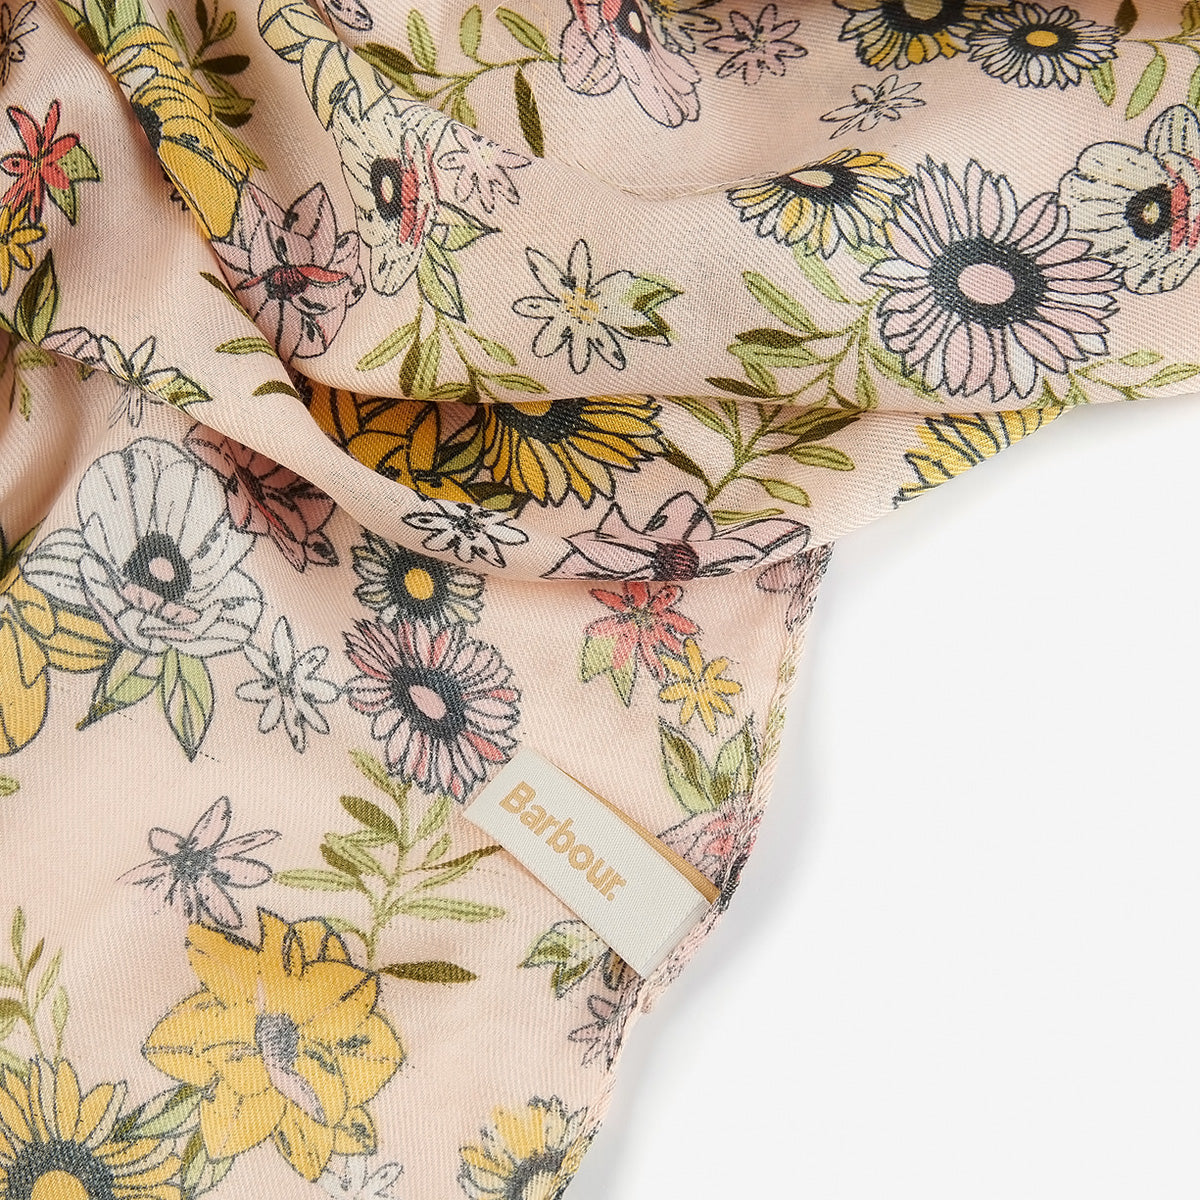 Barbour Oversized Floral Print Wrap